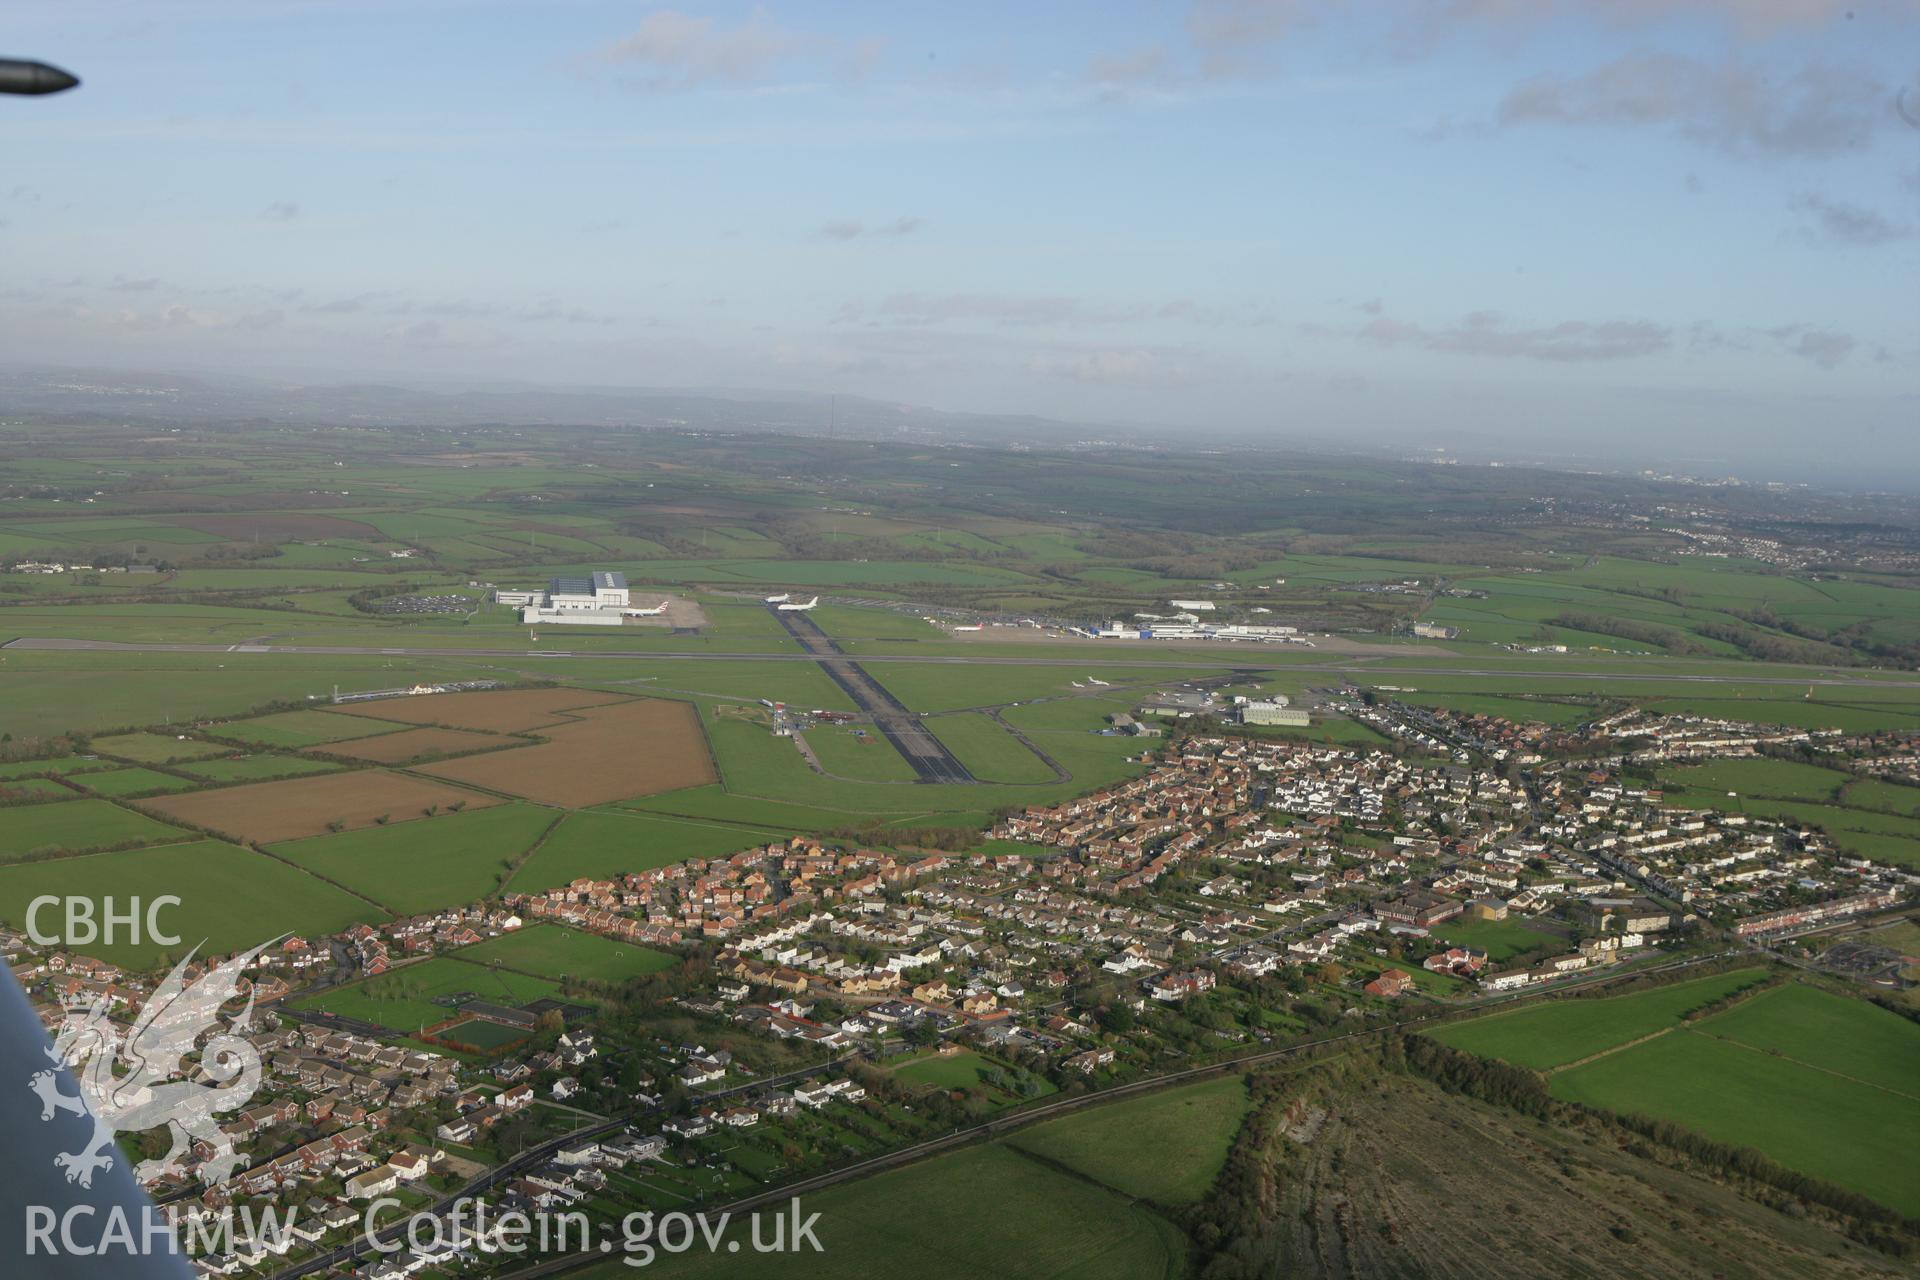 RCAHMW colour oblique photograph of view looking north over Font-y-gary, towards Cardiff-Wales Airport. Taken by Toby Driver on 17/11/2011.